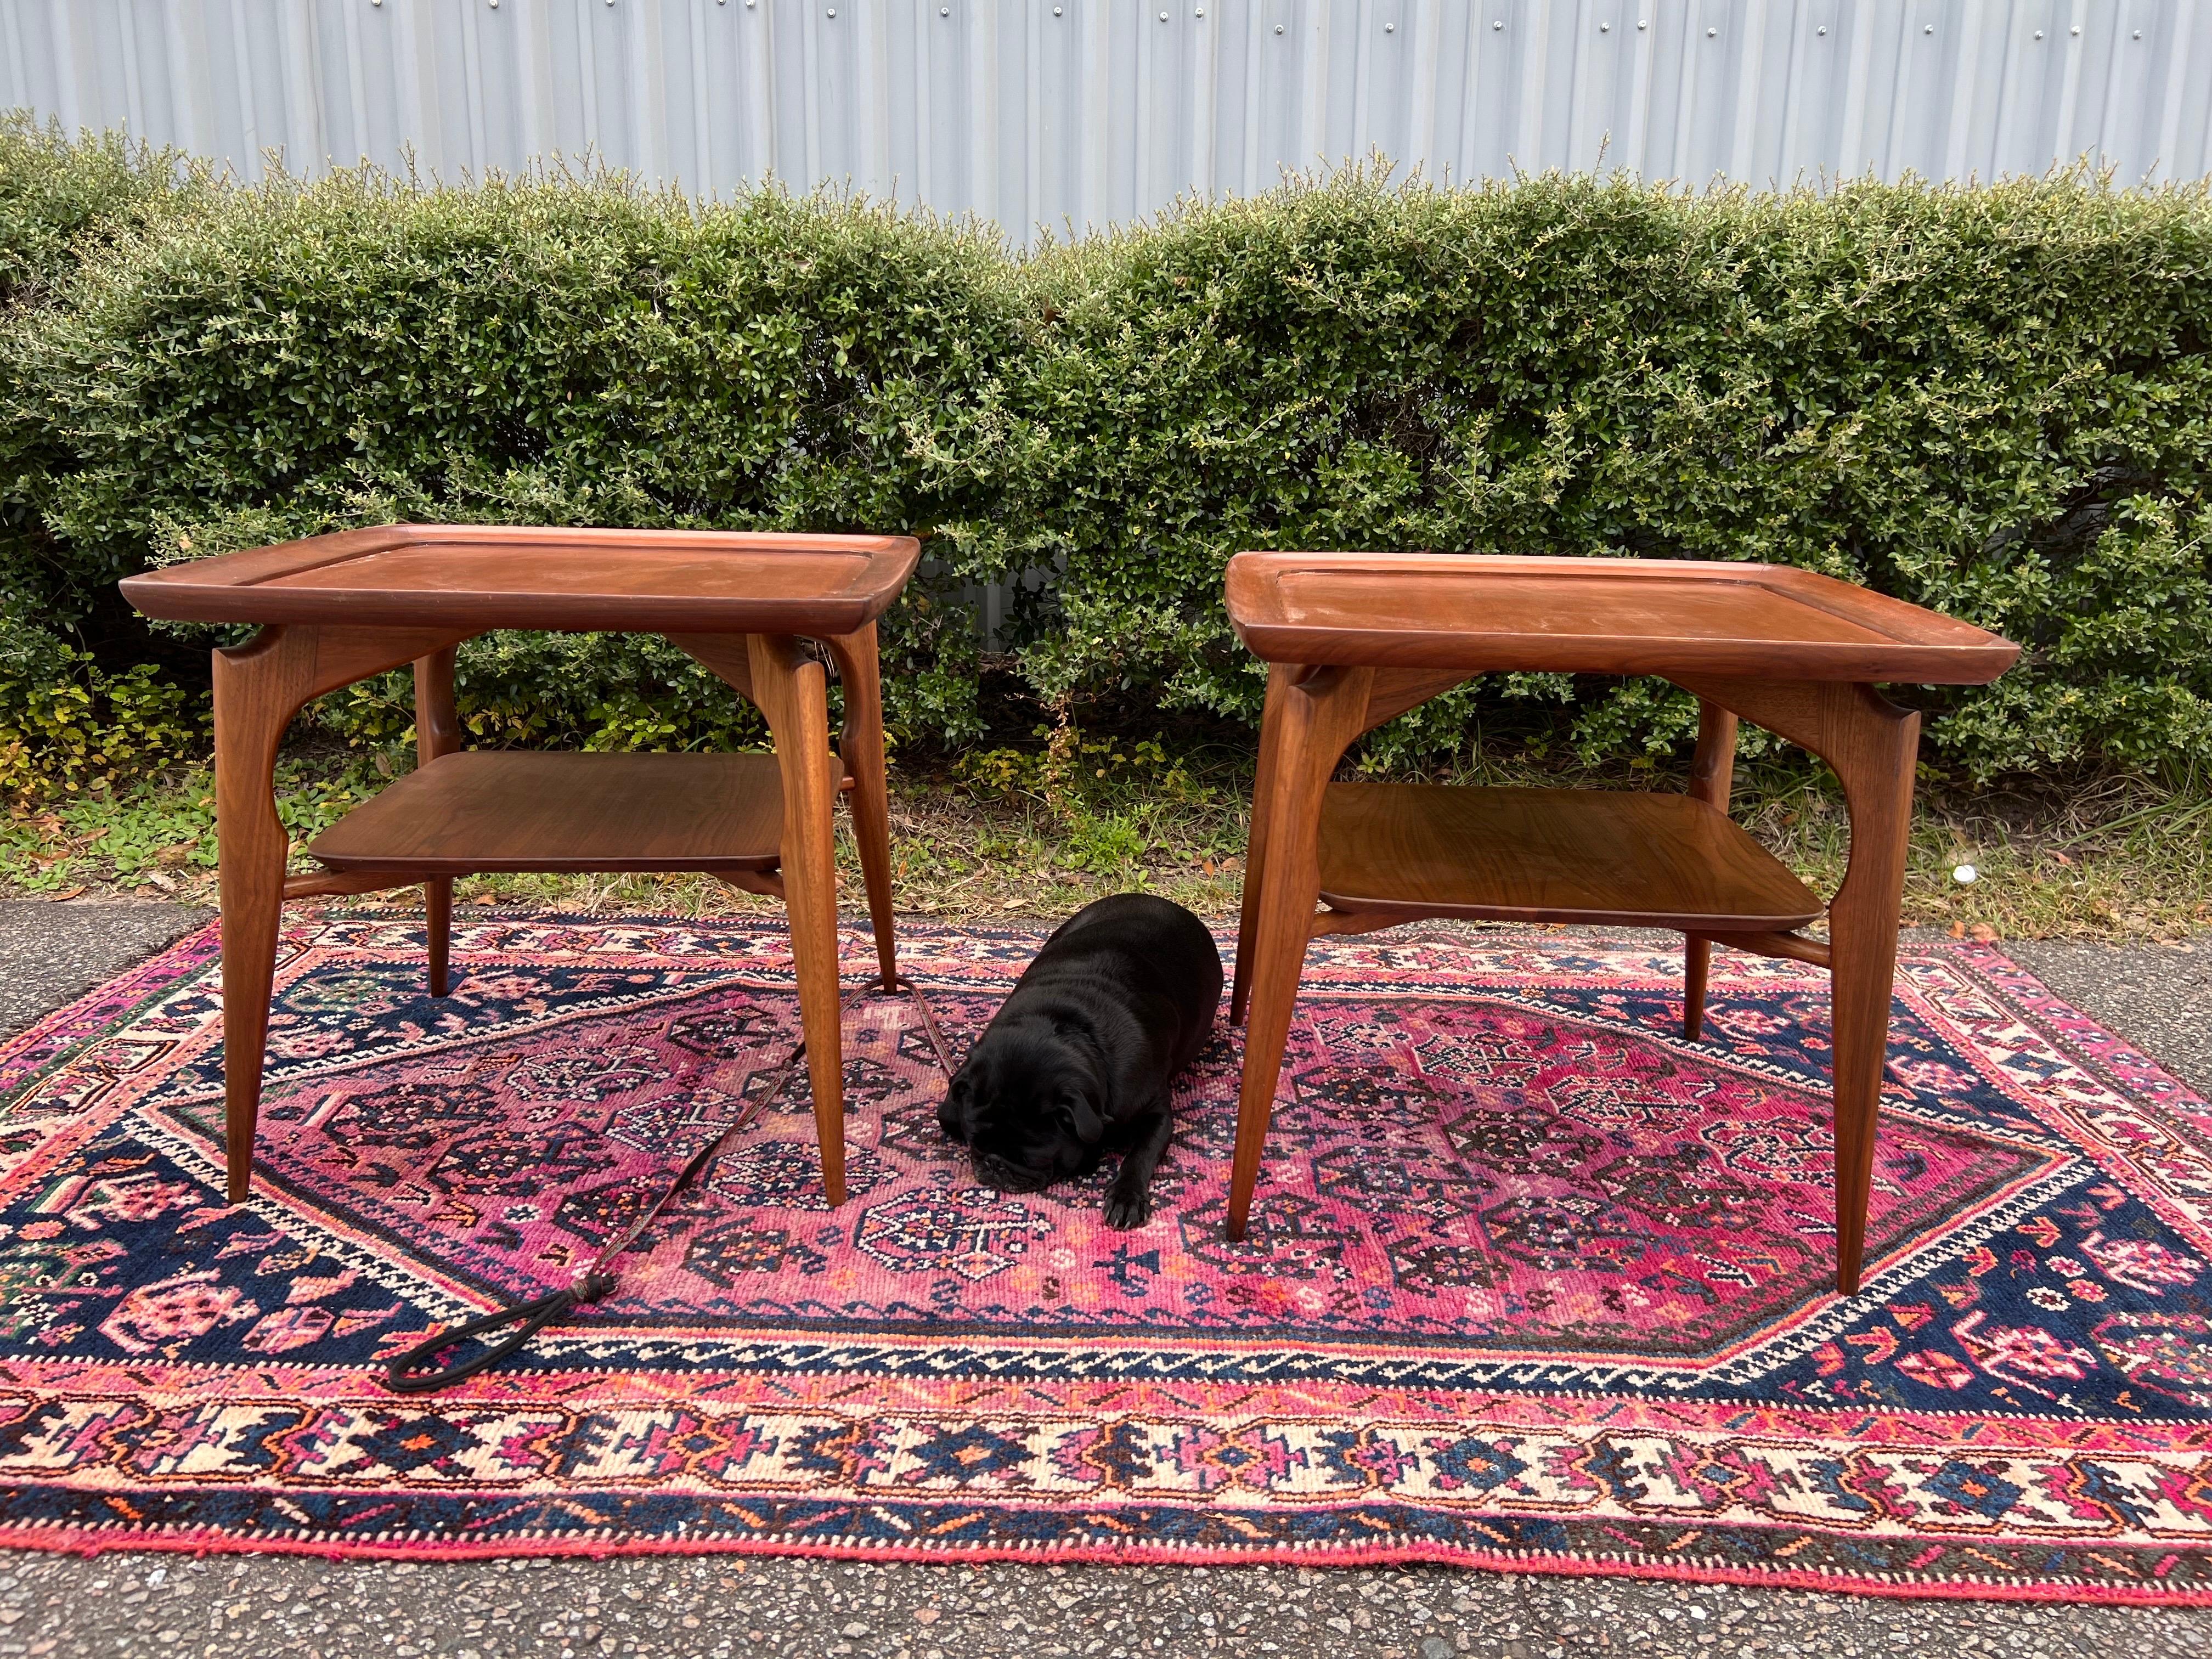 Pair of Mid Century Danish Modern Walnut Sculptural End Tables. These gorgeous tables feature a deep lipped round edging along the table top, lower shelves, raised and sculpted edges. Solid walnut frames, tapered legs, and sleek sculptural form,